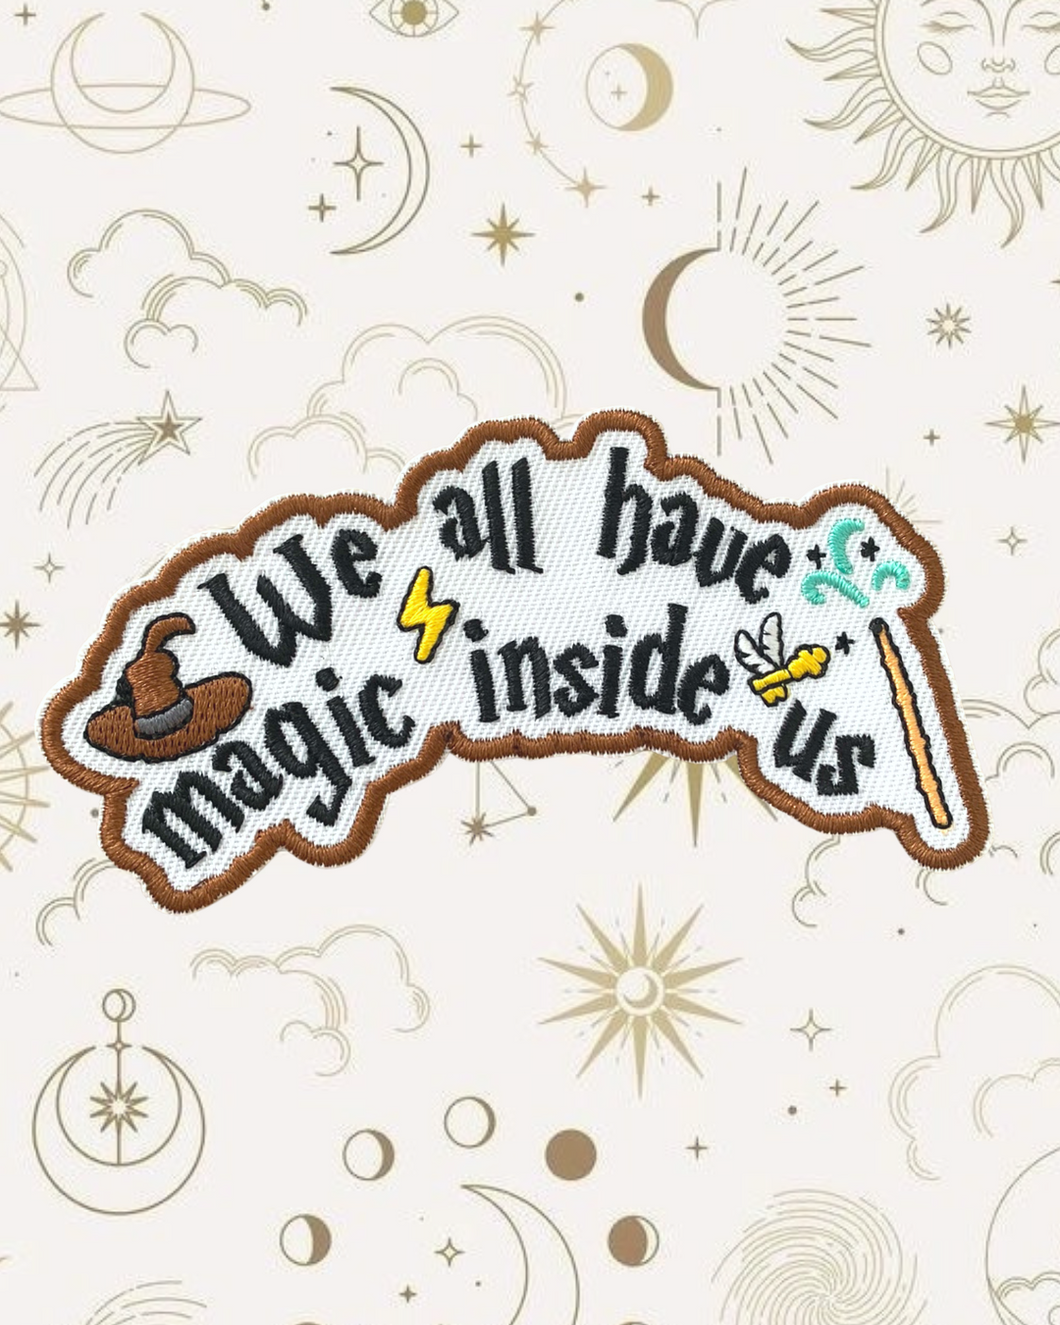 ★ We all have magic inside us ★